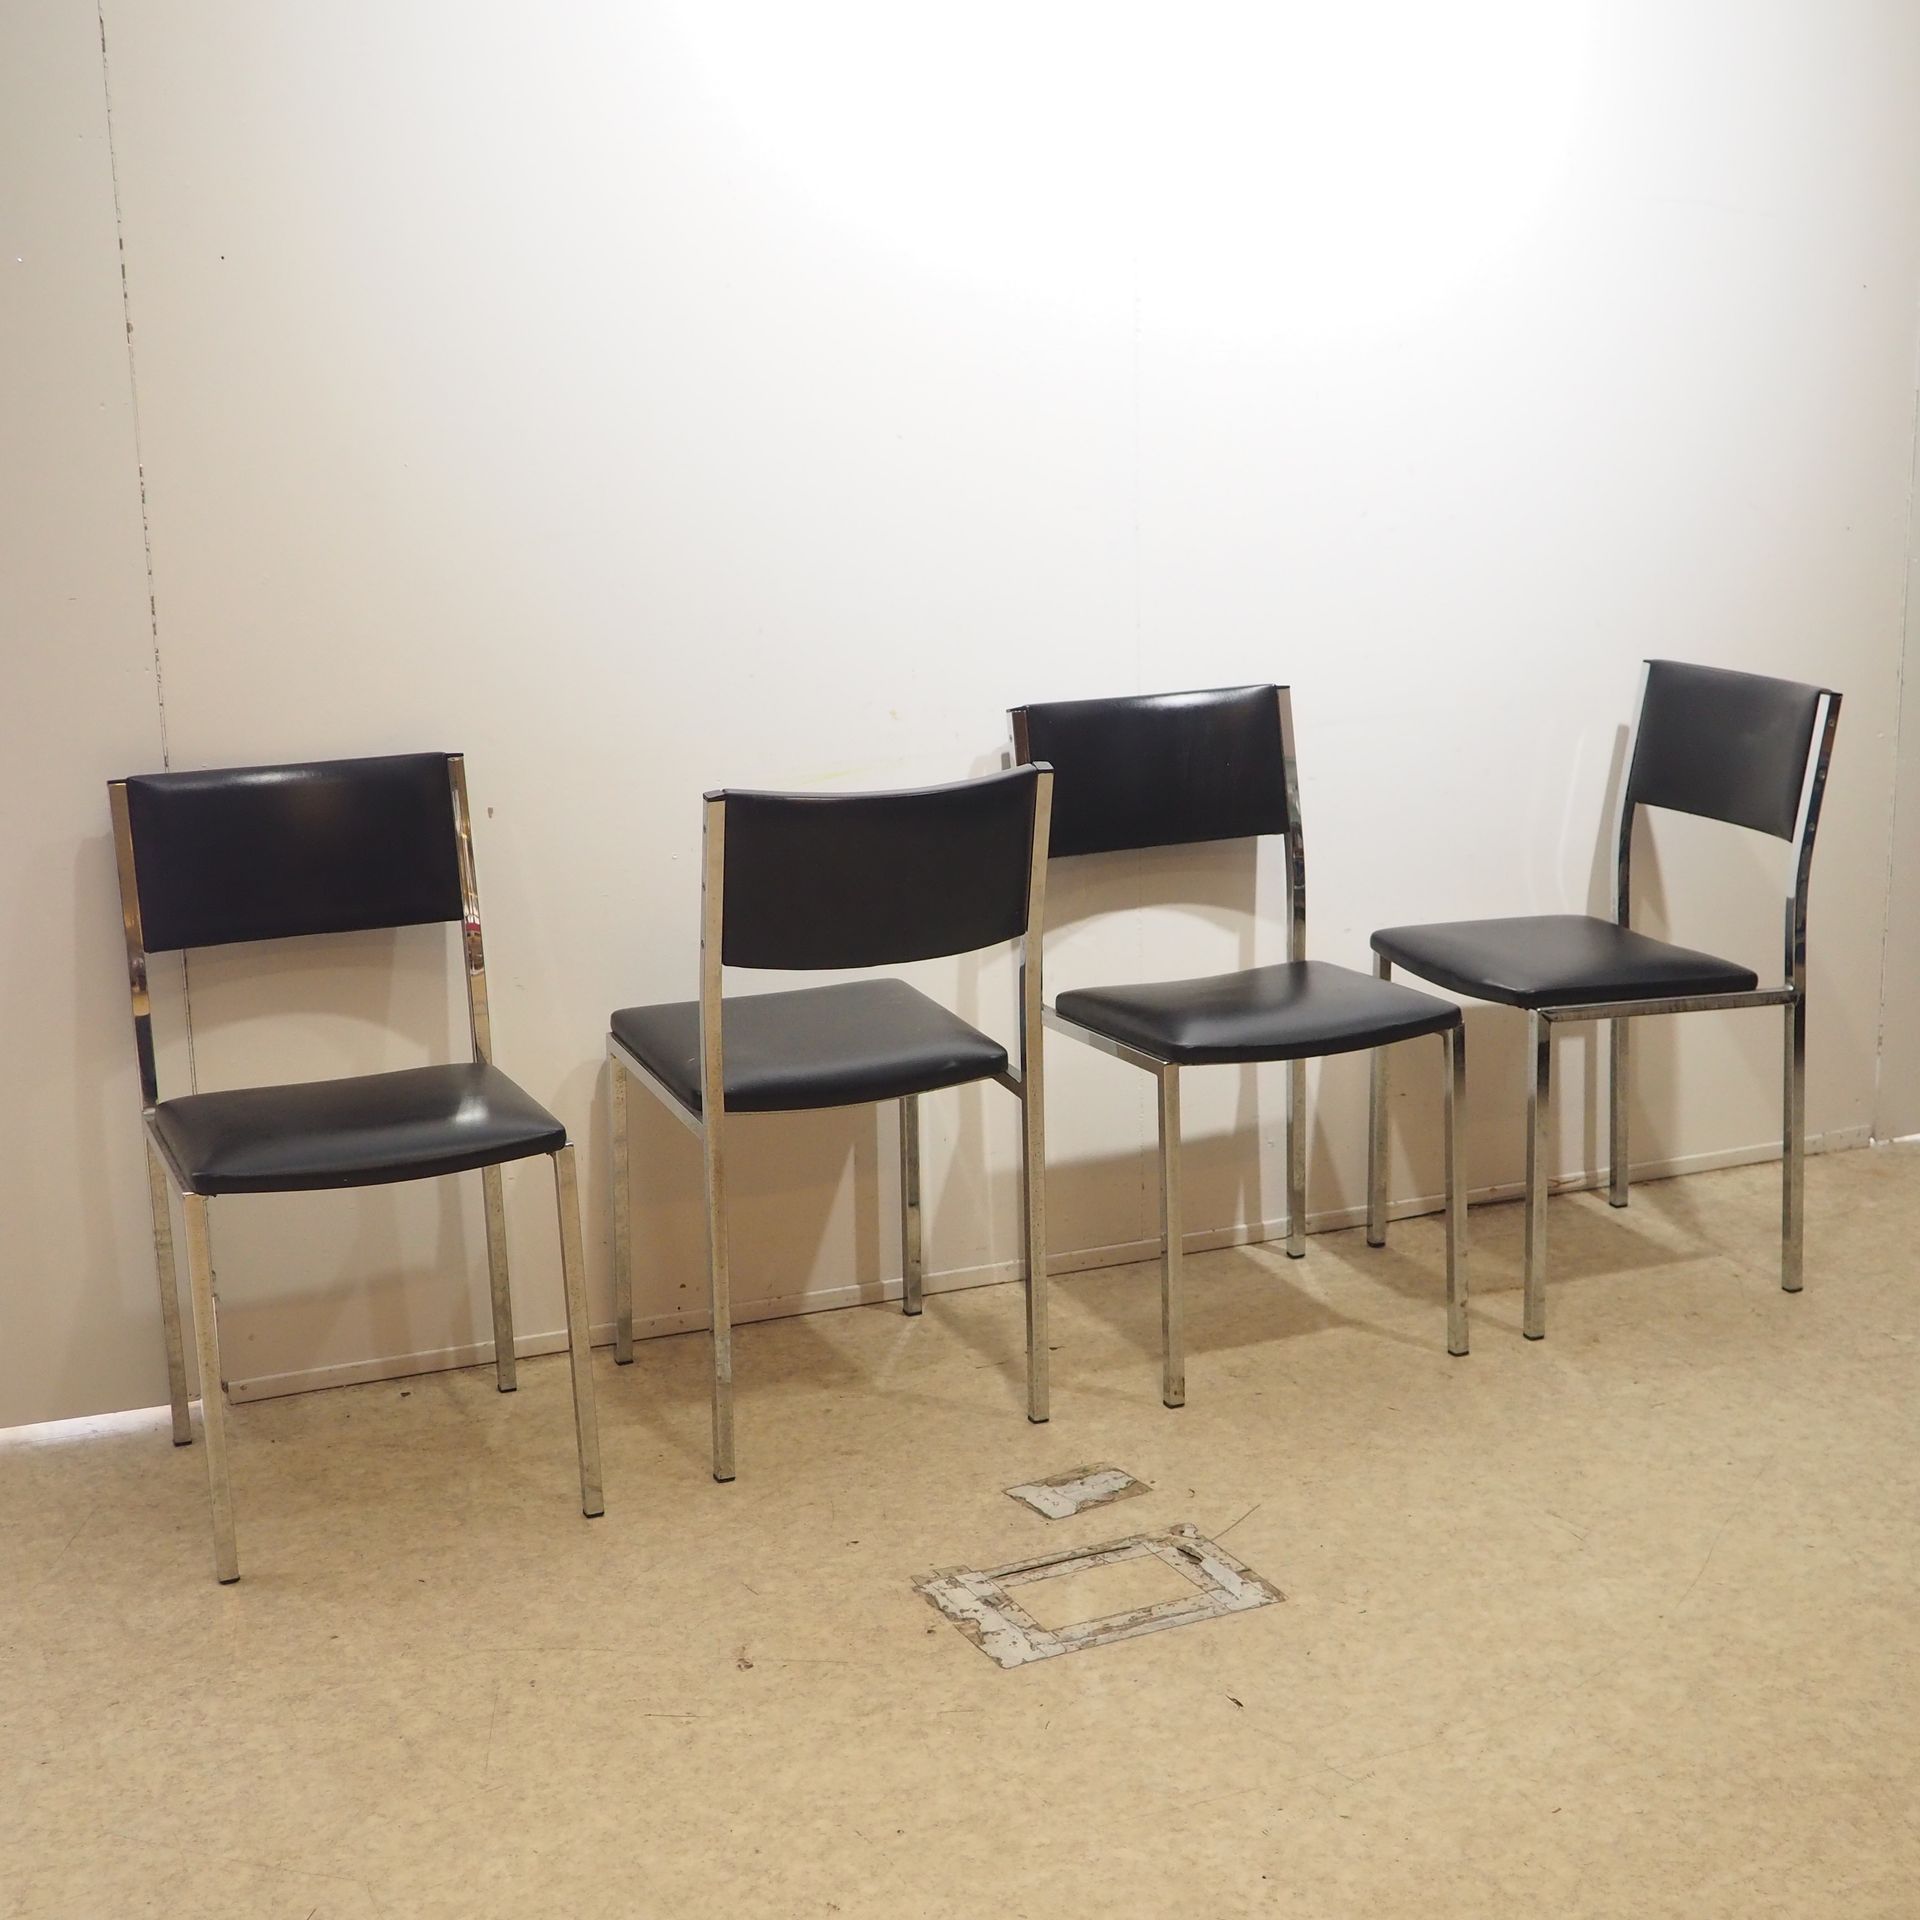 Null Suite of 4 kitchen chairs circa 1970 : Square section tubular metal structu&hellip;